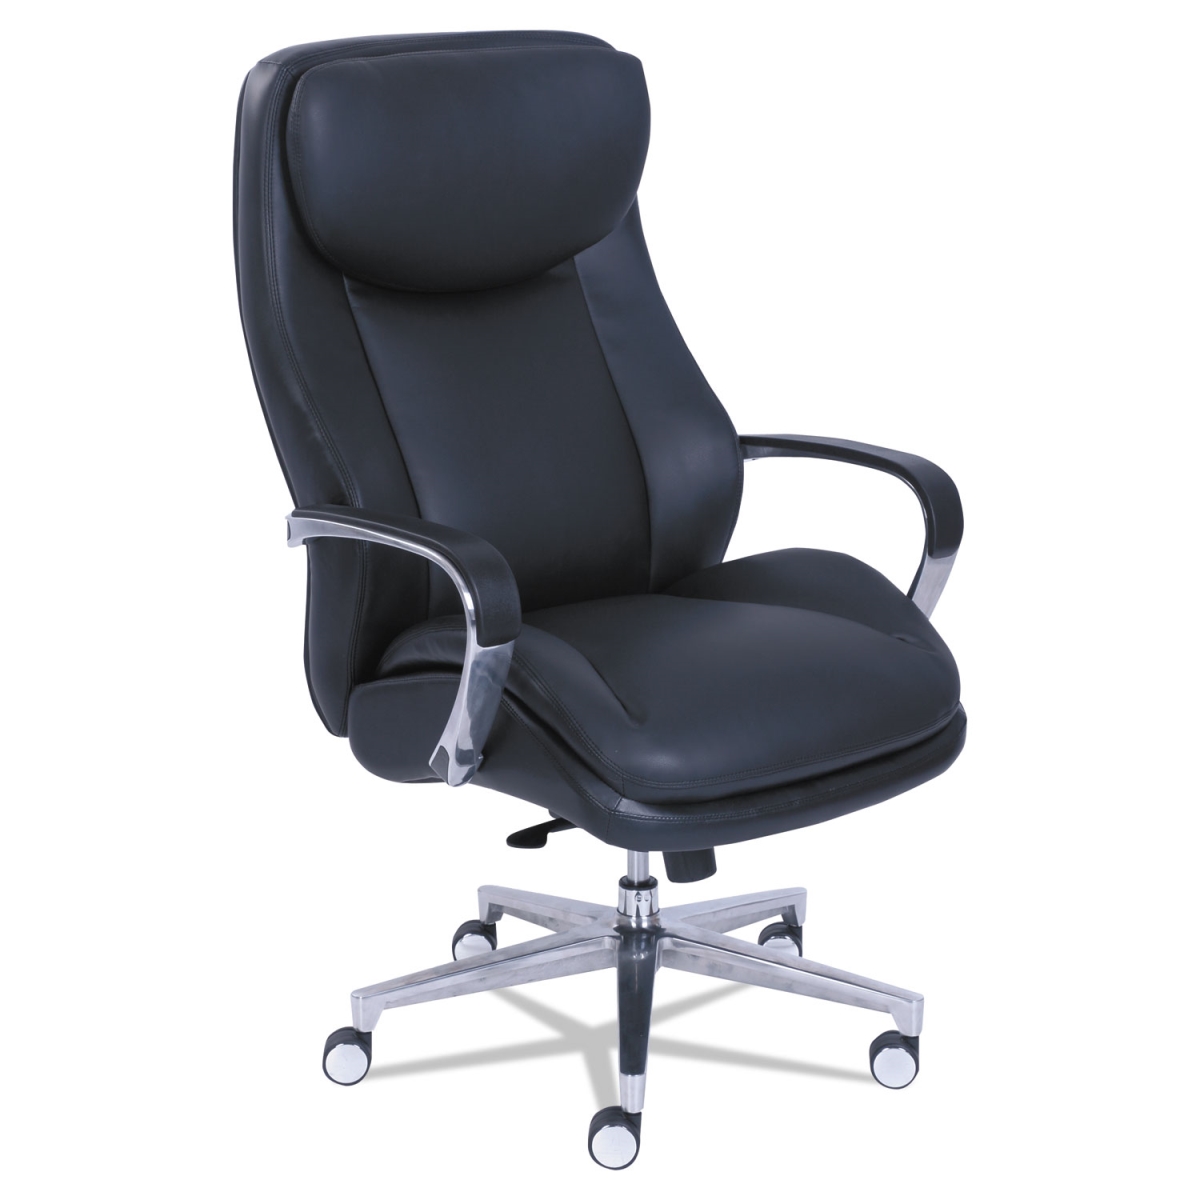 Lzb48968 Commercial 2000 Big And Tall Executive Chair, Black